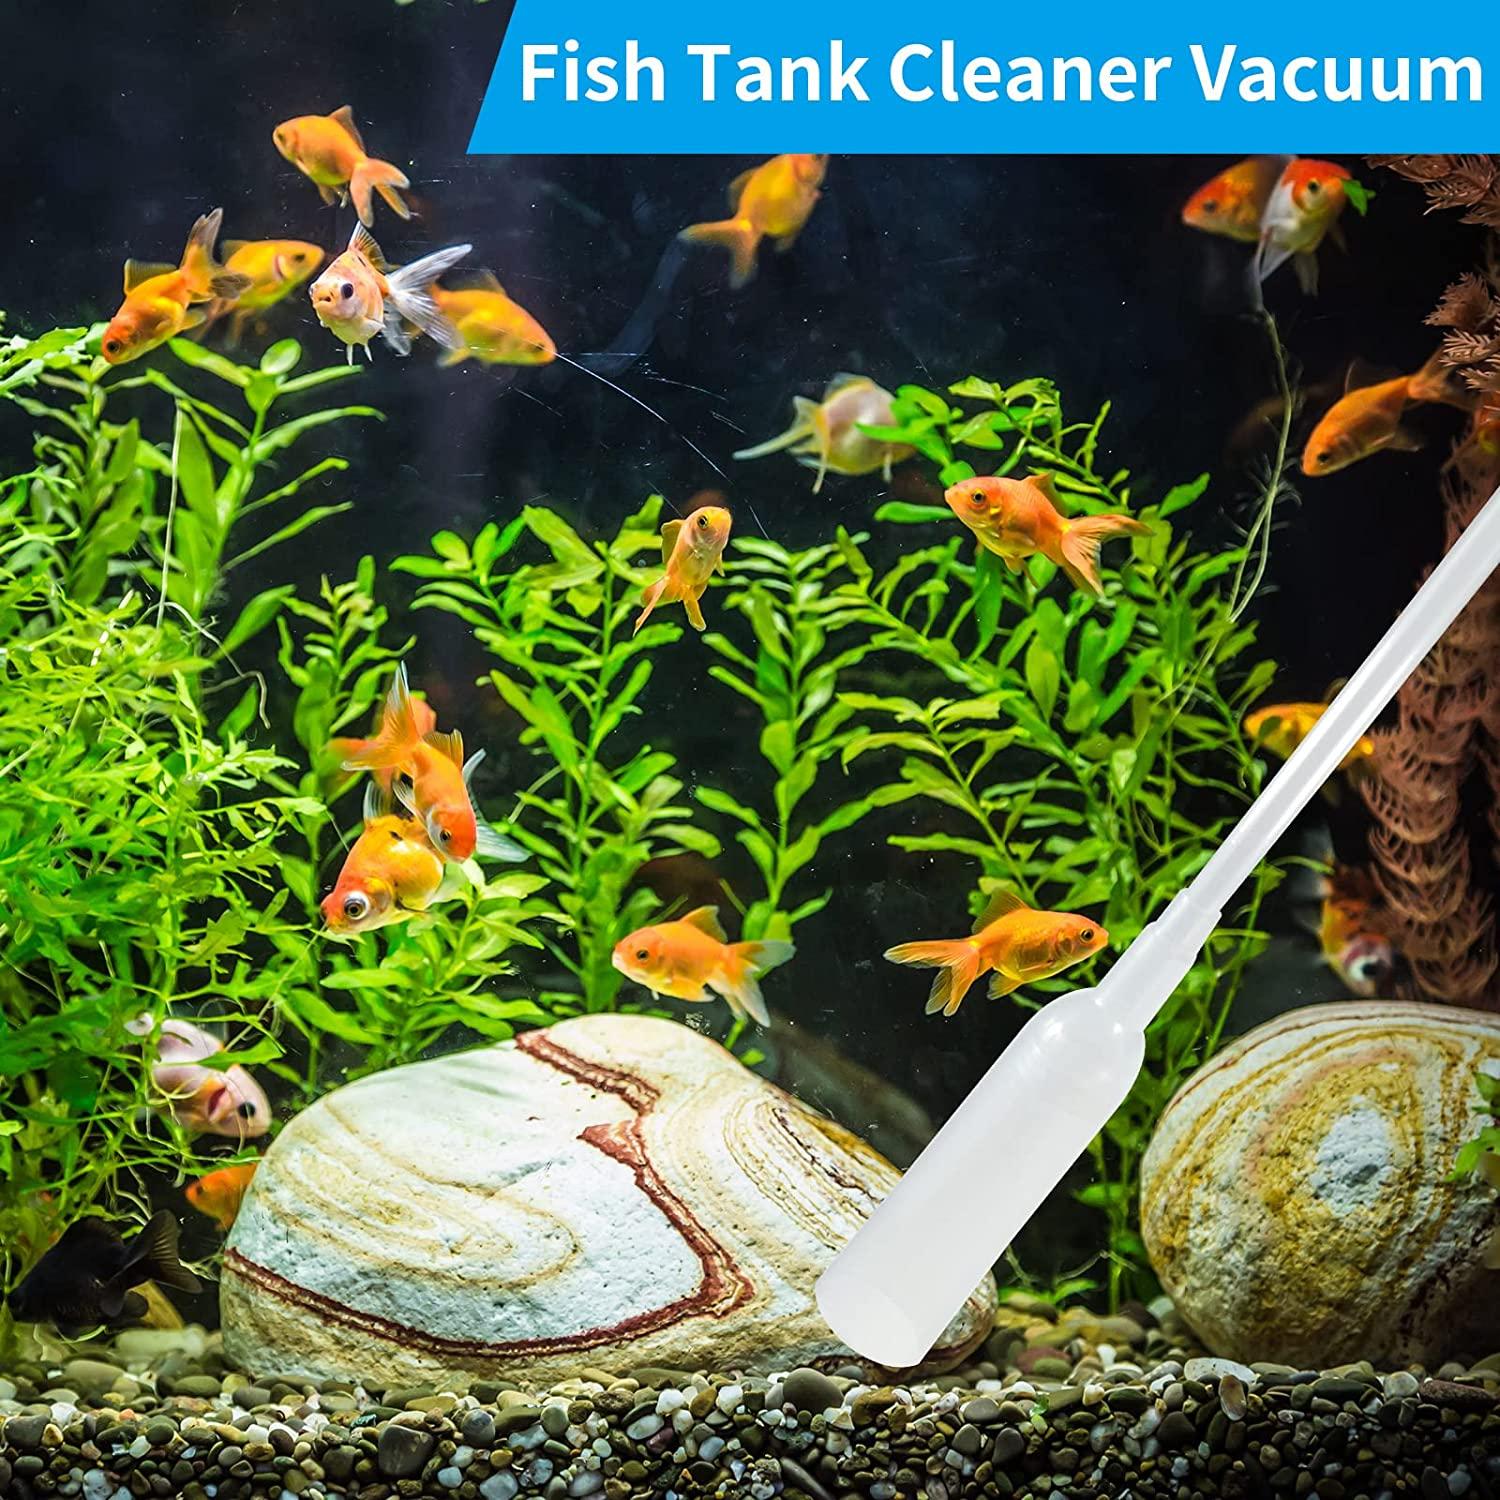 Tank Cleaning Aquarium Cleaning Kit, Betta Fish Tank Accessories, Aquarium Gravel Cleaner, Algae Scrapers 5 in 1 Kit for Water Change and Sand Cleaner, Long Siphon Nozzle with Valve